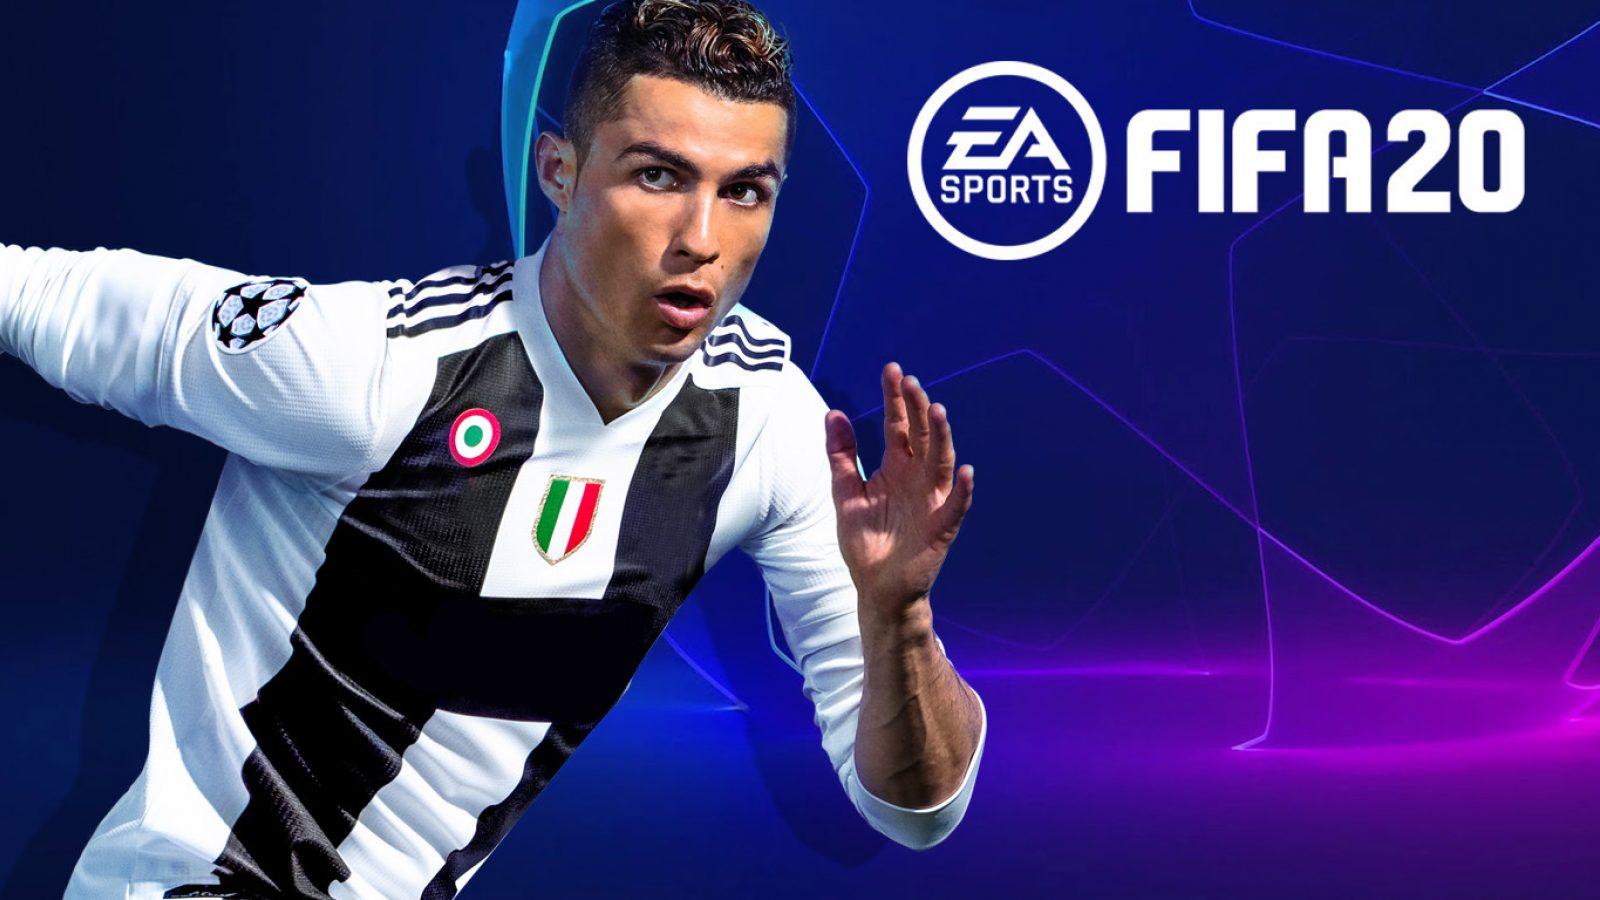 Here's why Piemonte Calcio is joining Serie A in FIFA 20